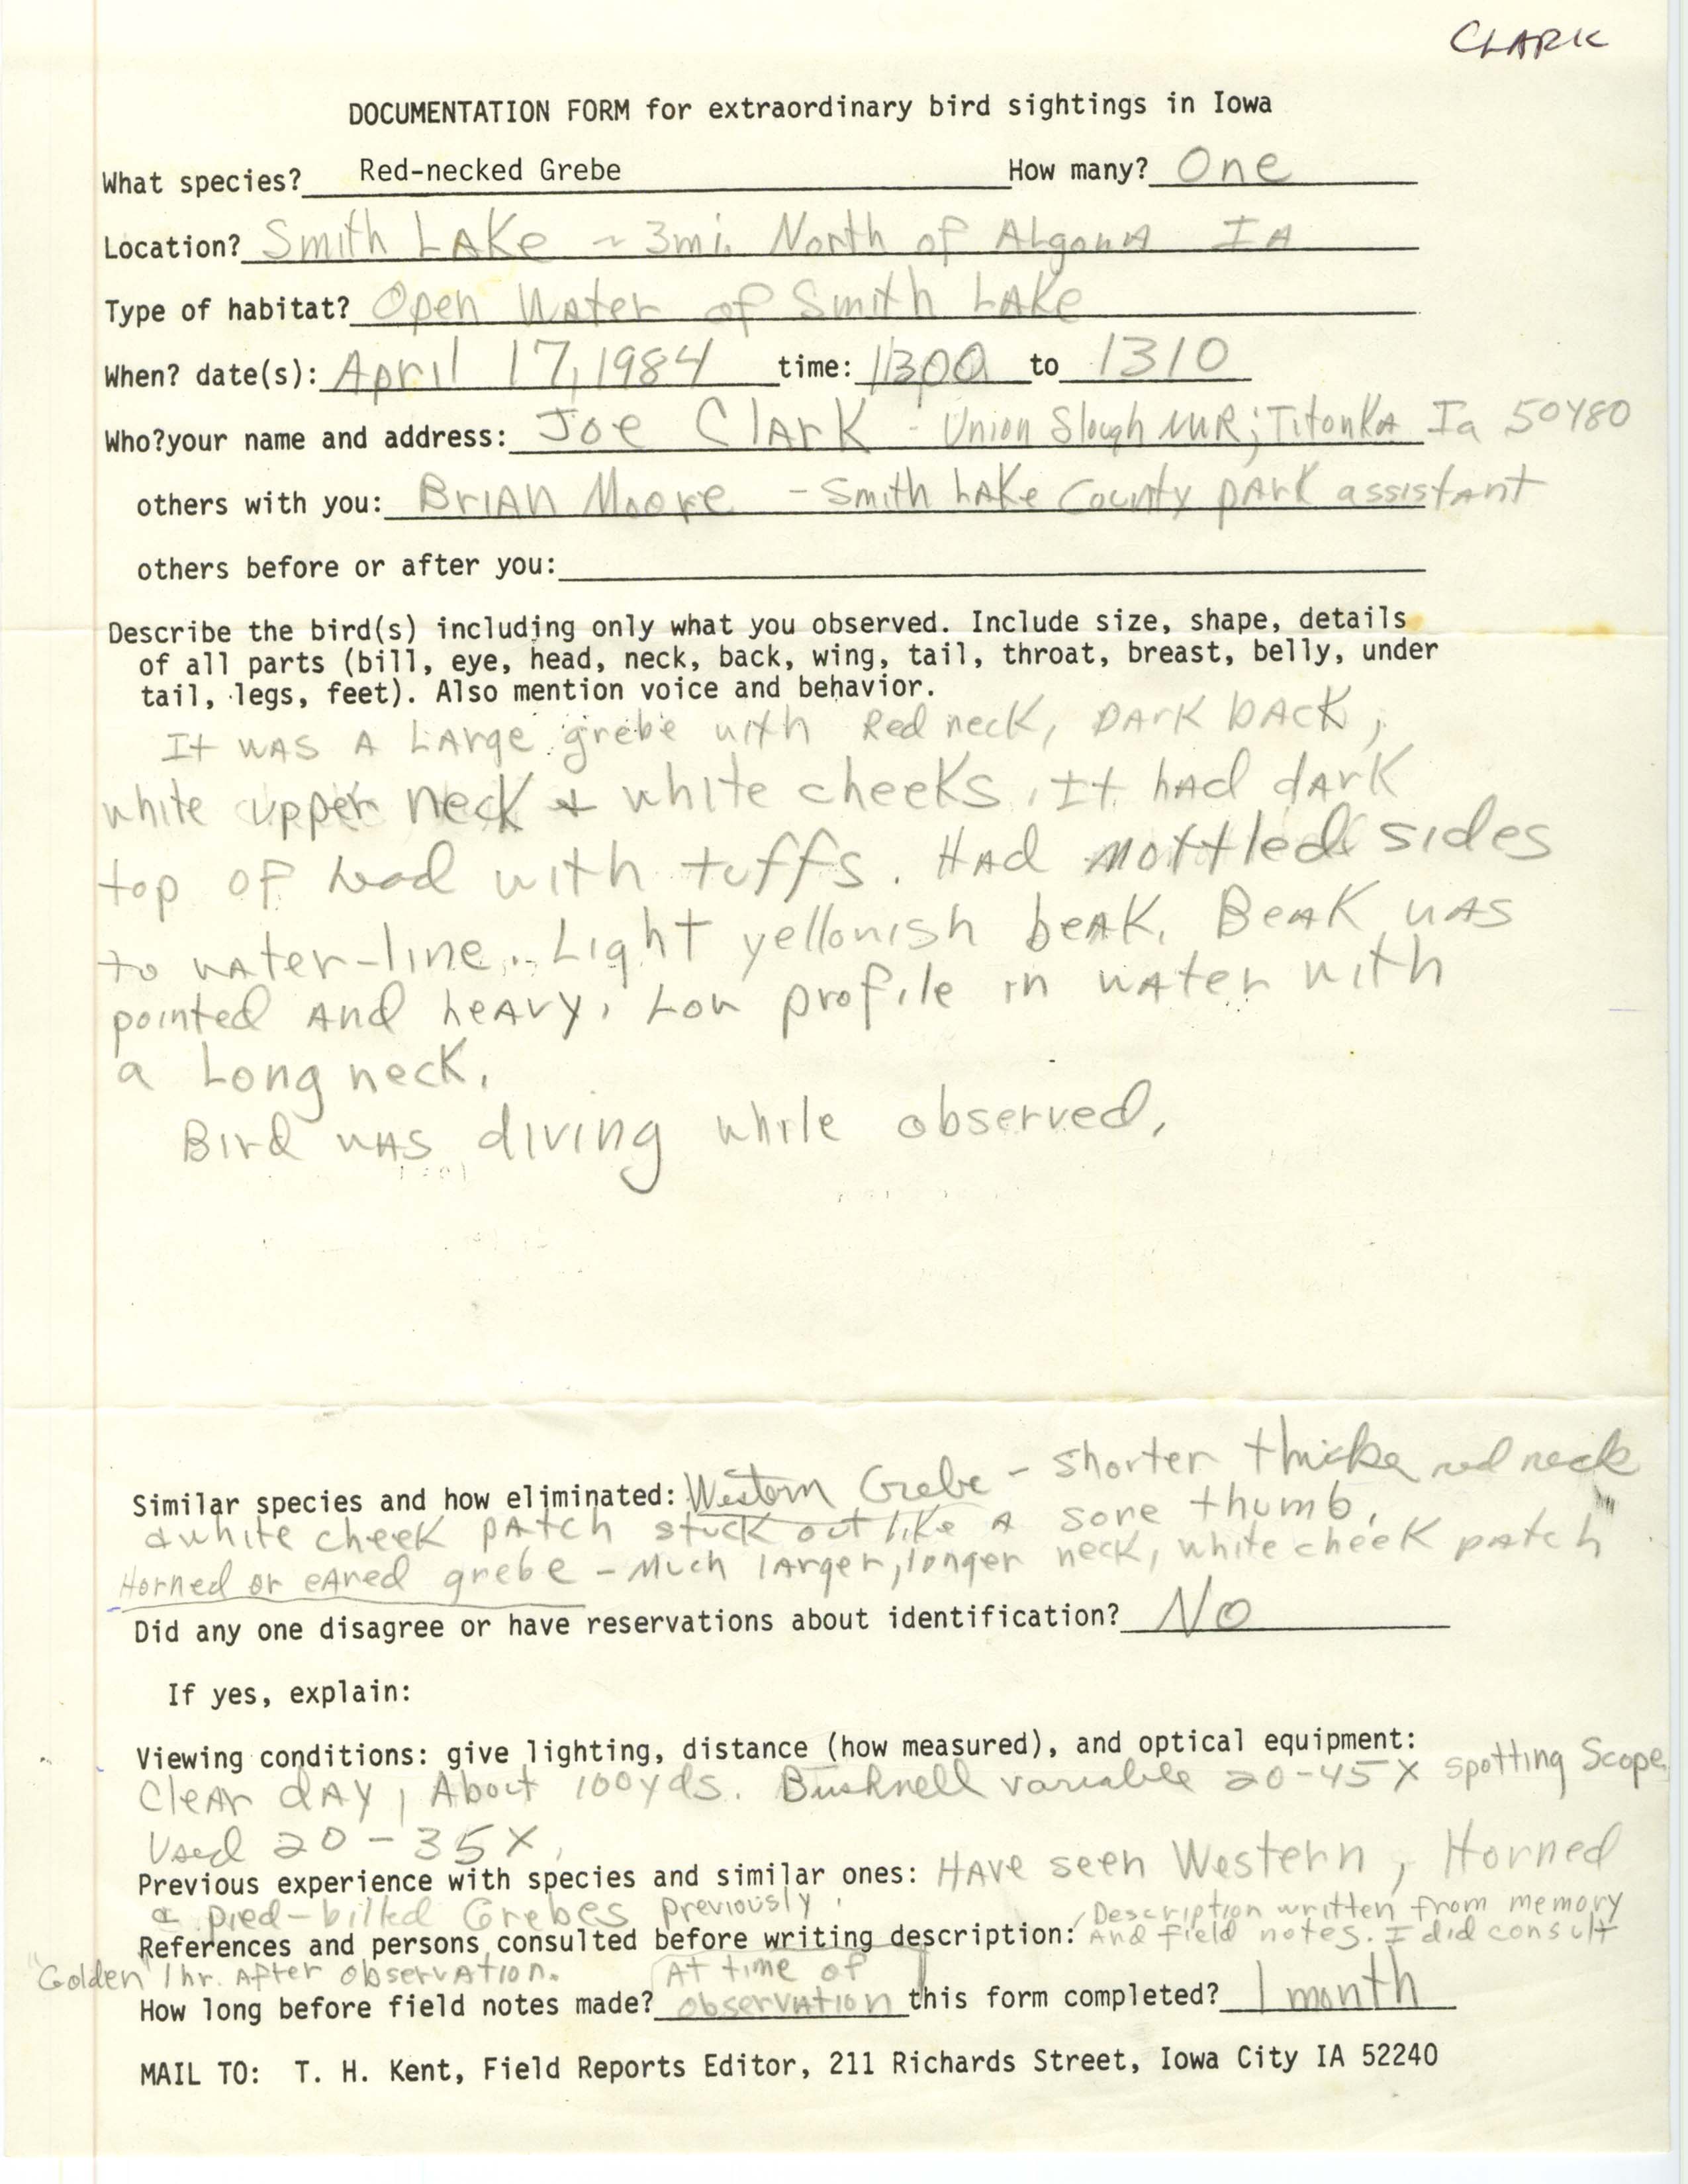 Rare bird documentation form for Red-necked Grebe at Smith Lake, 1984